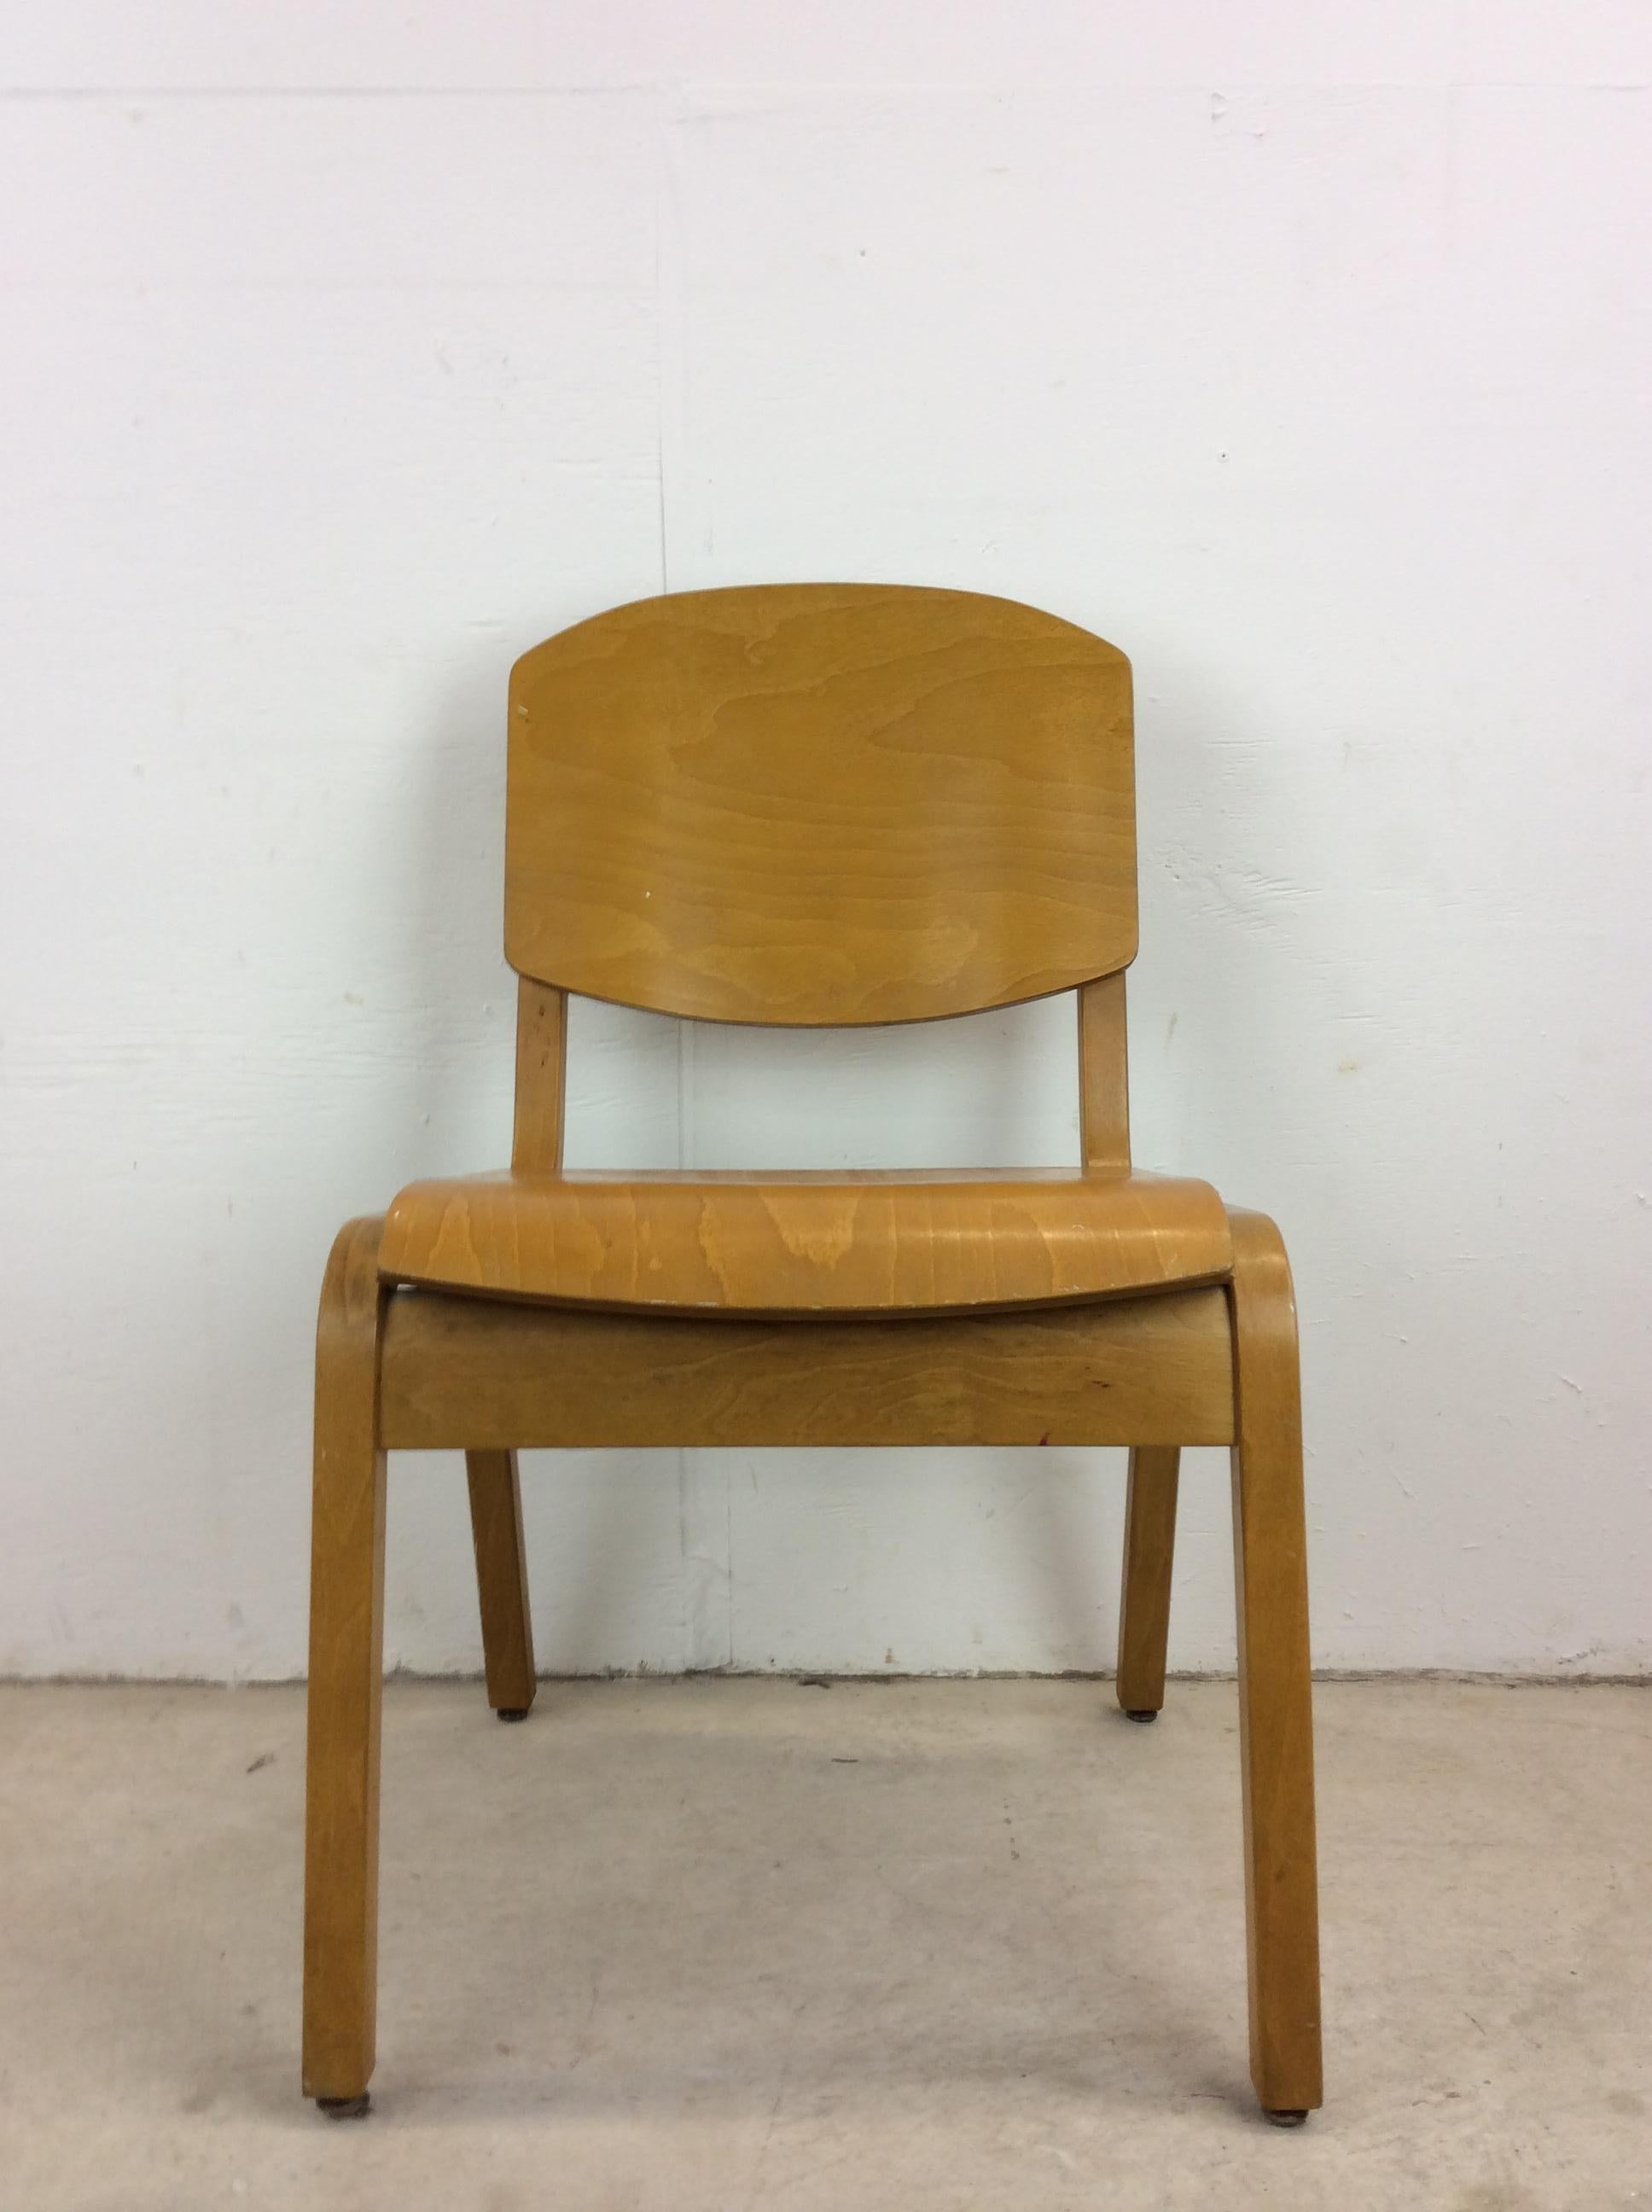 This mid century modern side chair by Tecta Furniture features unique plywood construction, original maple finish, bentwood seat and back with tall tapered legs.  Similar in style to Heywood Wakefield but I am told this is designed by Stafford for